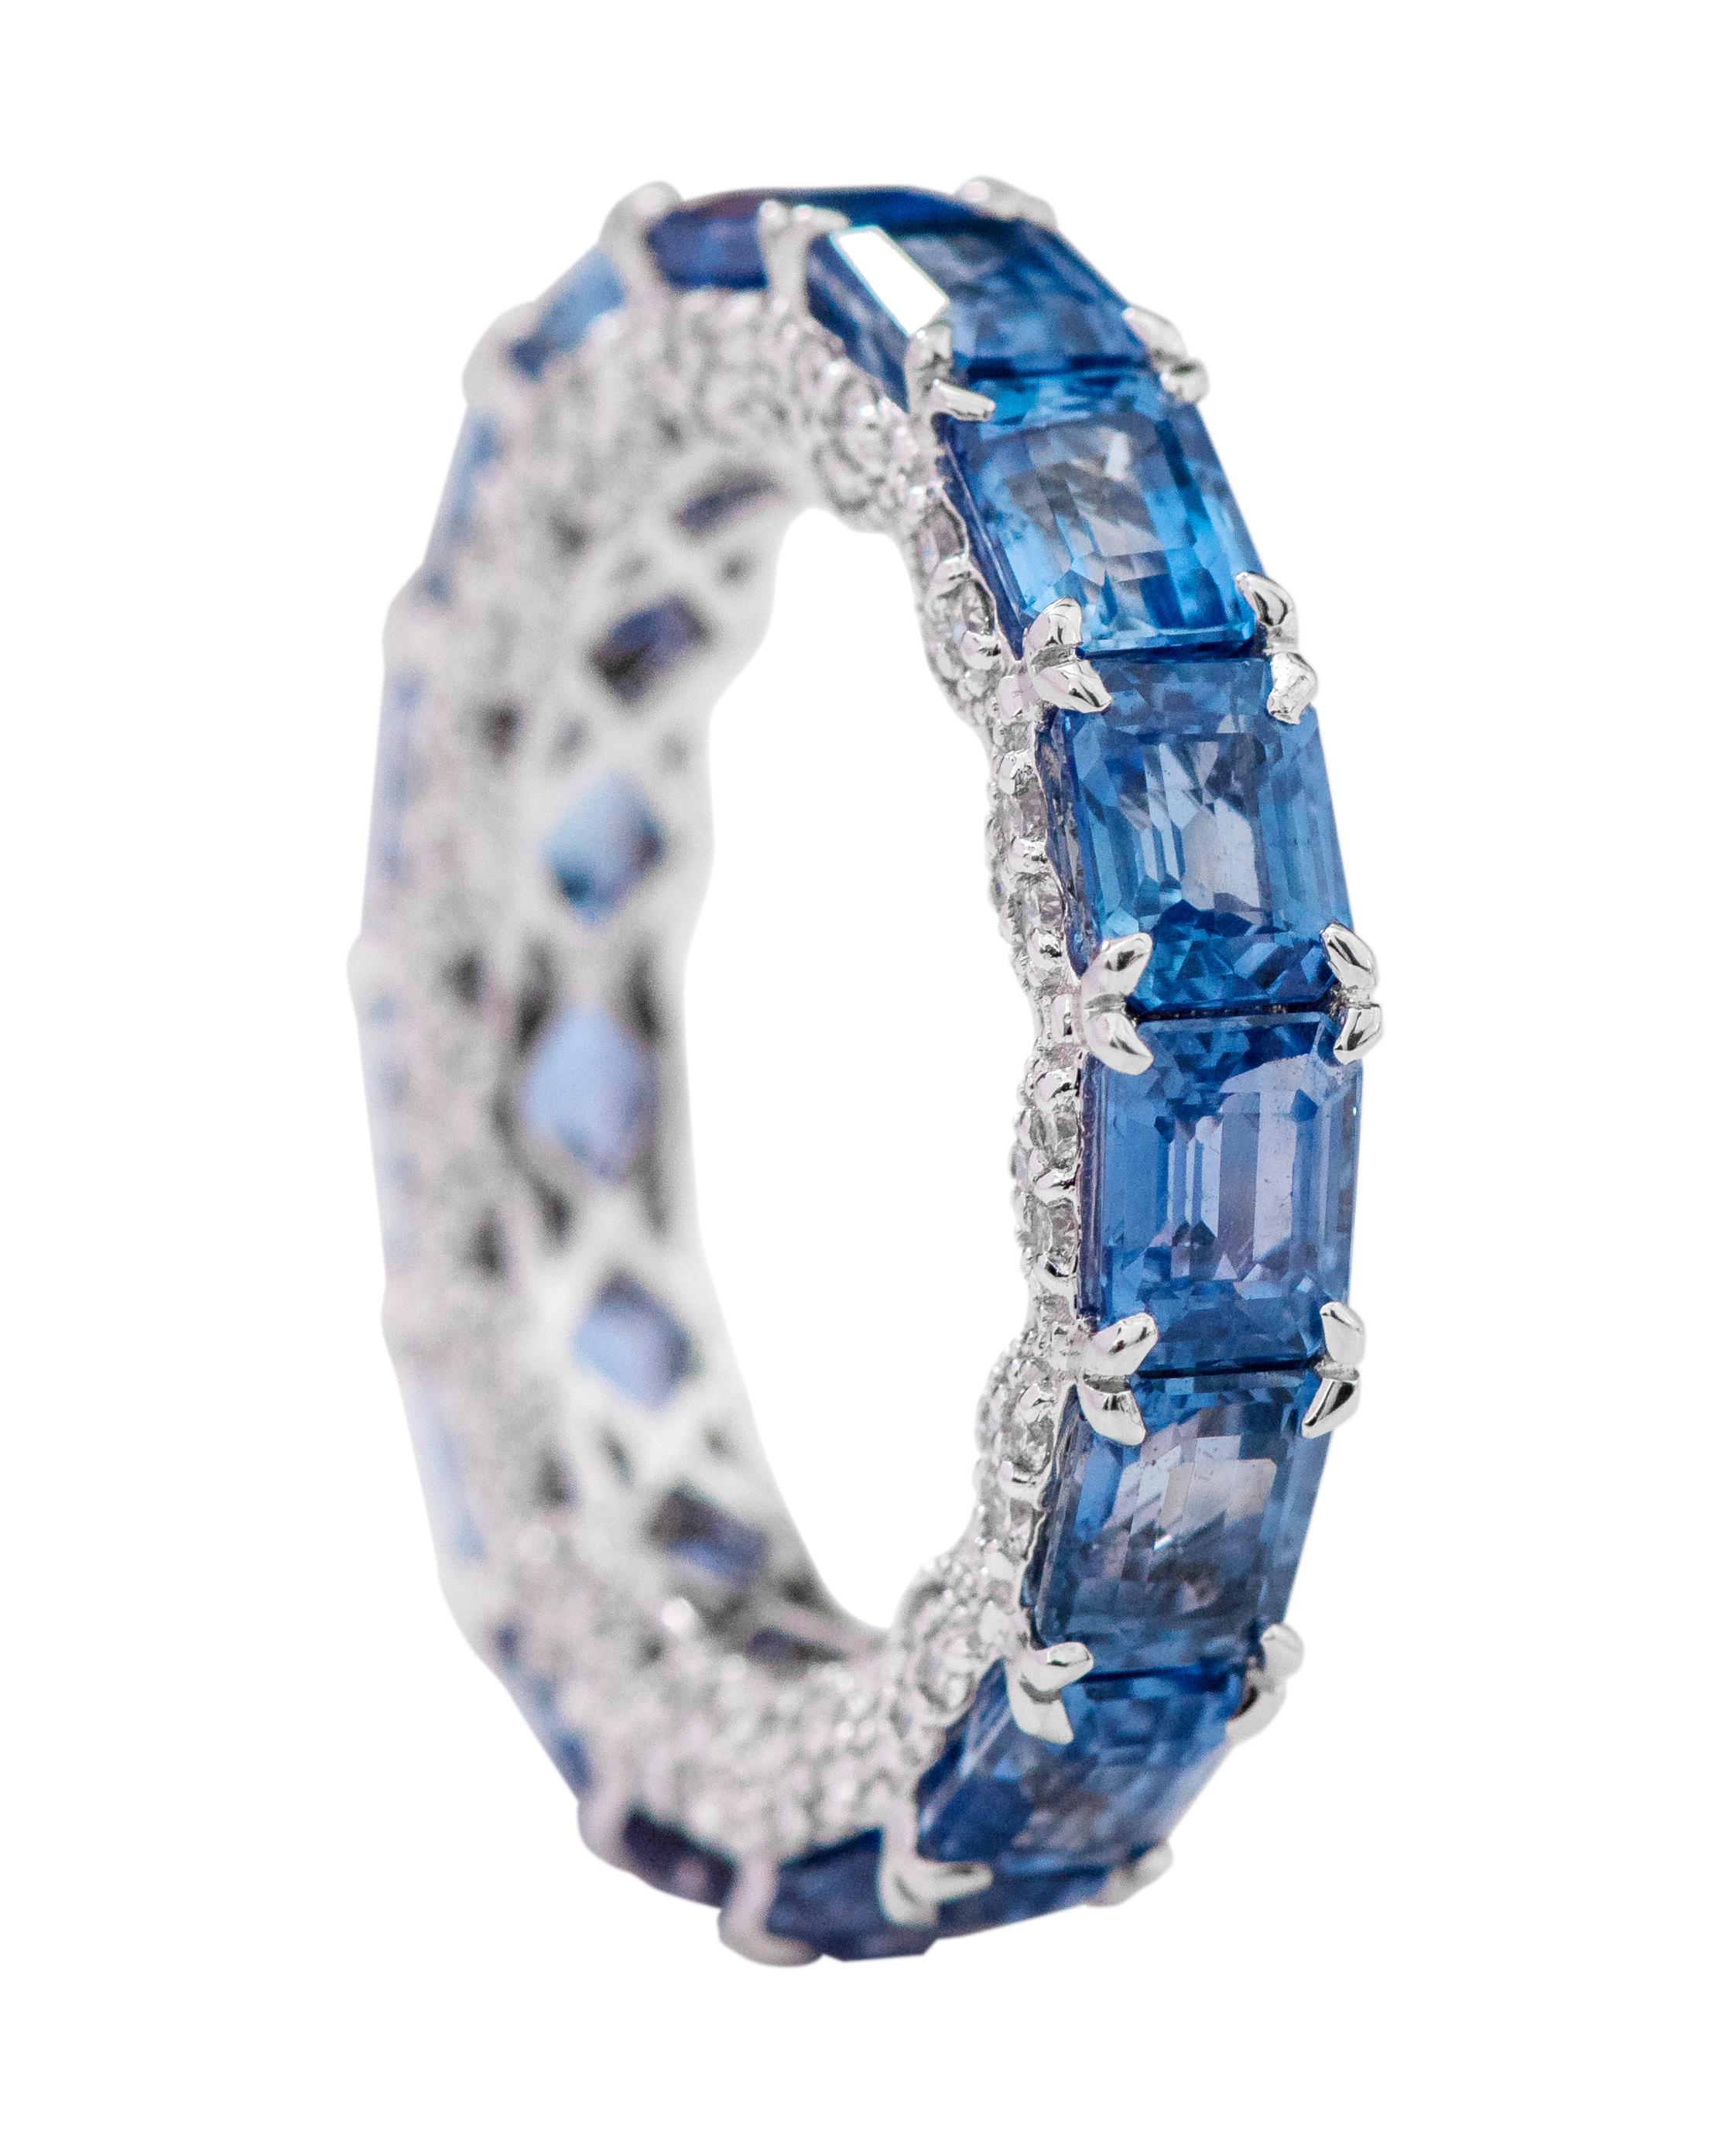 18 Karat White Gold 8.81 Carat Emerald-Cut Sapphire and Diamond Eternity Band Ring

This impressive Prussian blue sapphire and side diamond band is breathtaking. The solitaire vertically placed emerald-cut sapphires in eagle prong white gold setting